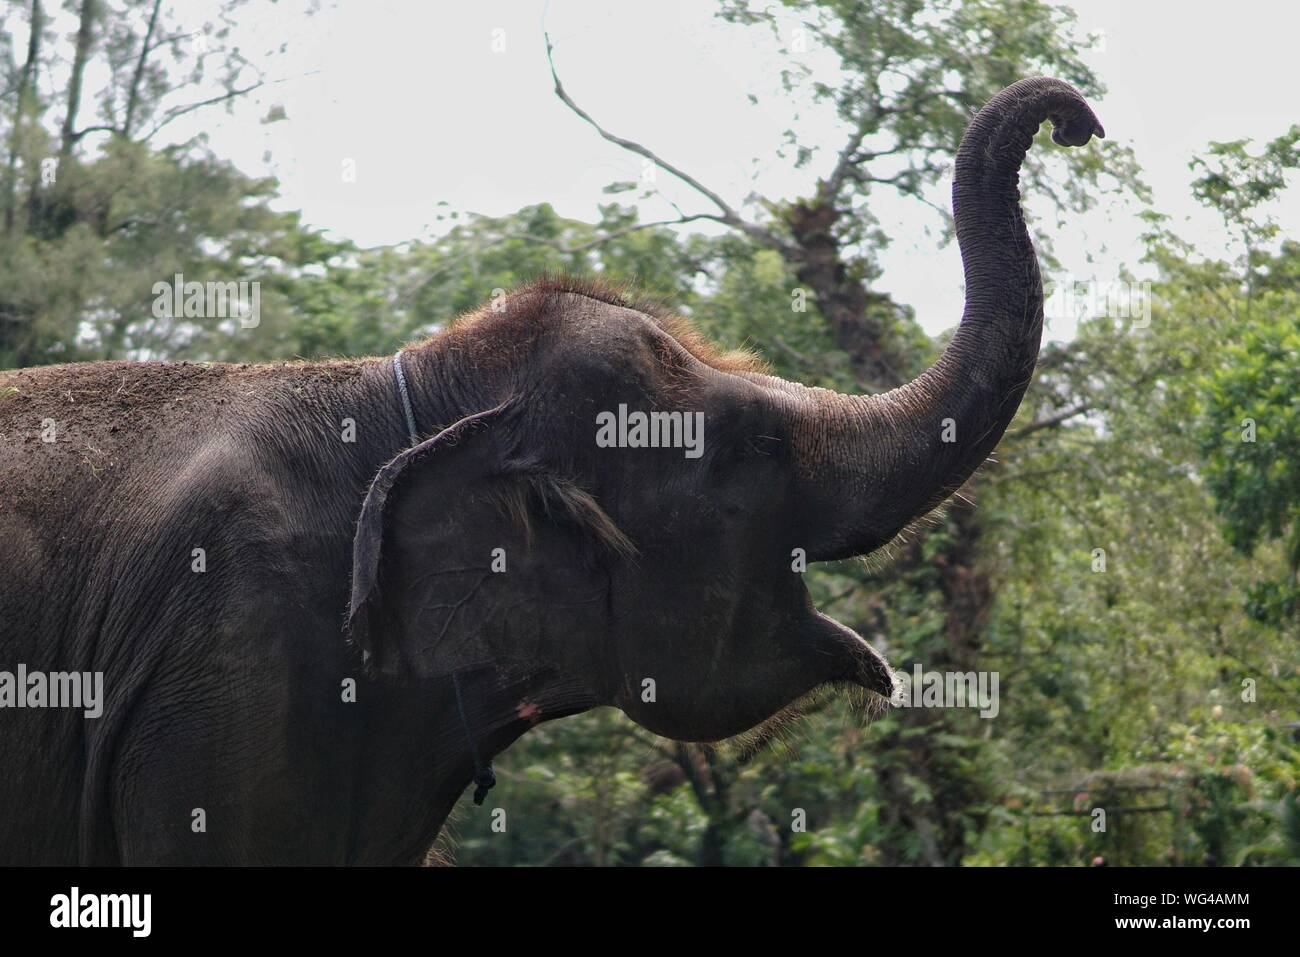 Side View Of Elephant Bellowing Stock Photo